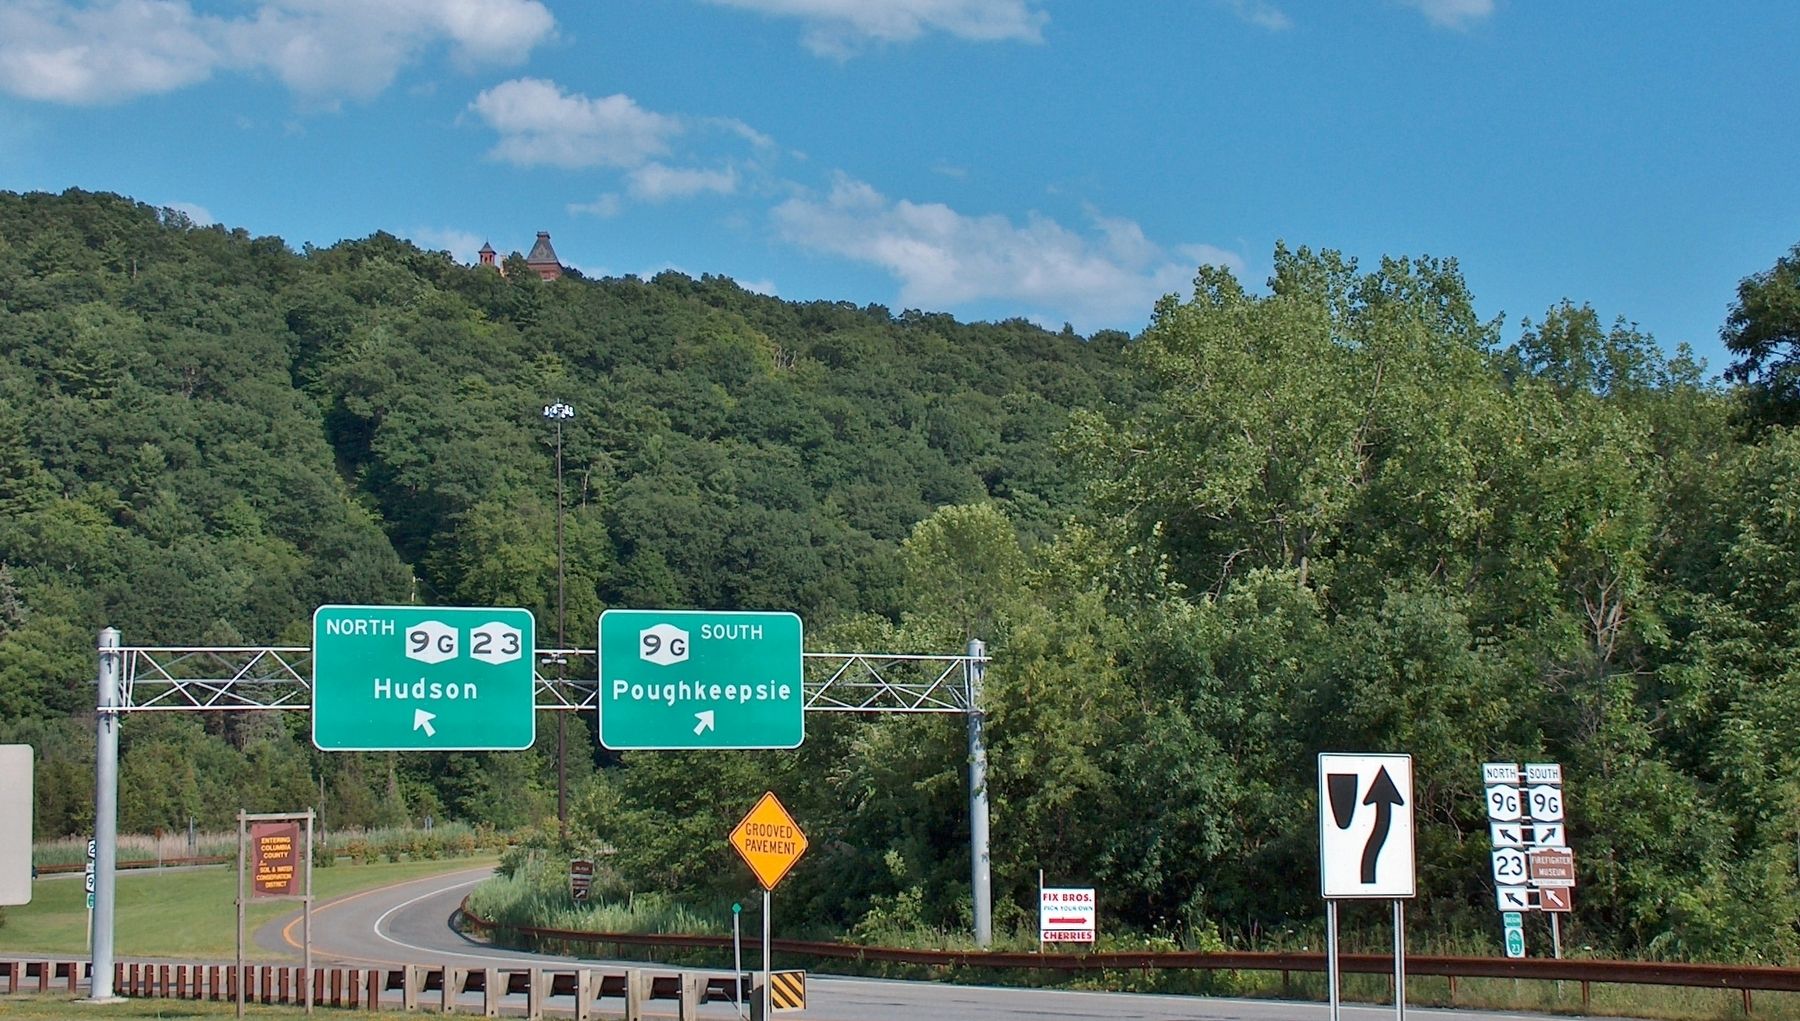 Olana Viewshed Marker (<i>New York Hwy 23 exit to 9G; marker just ahead right; Olana top</i>) image. Click for full size.